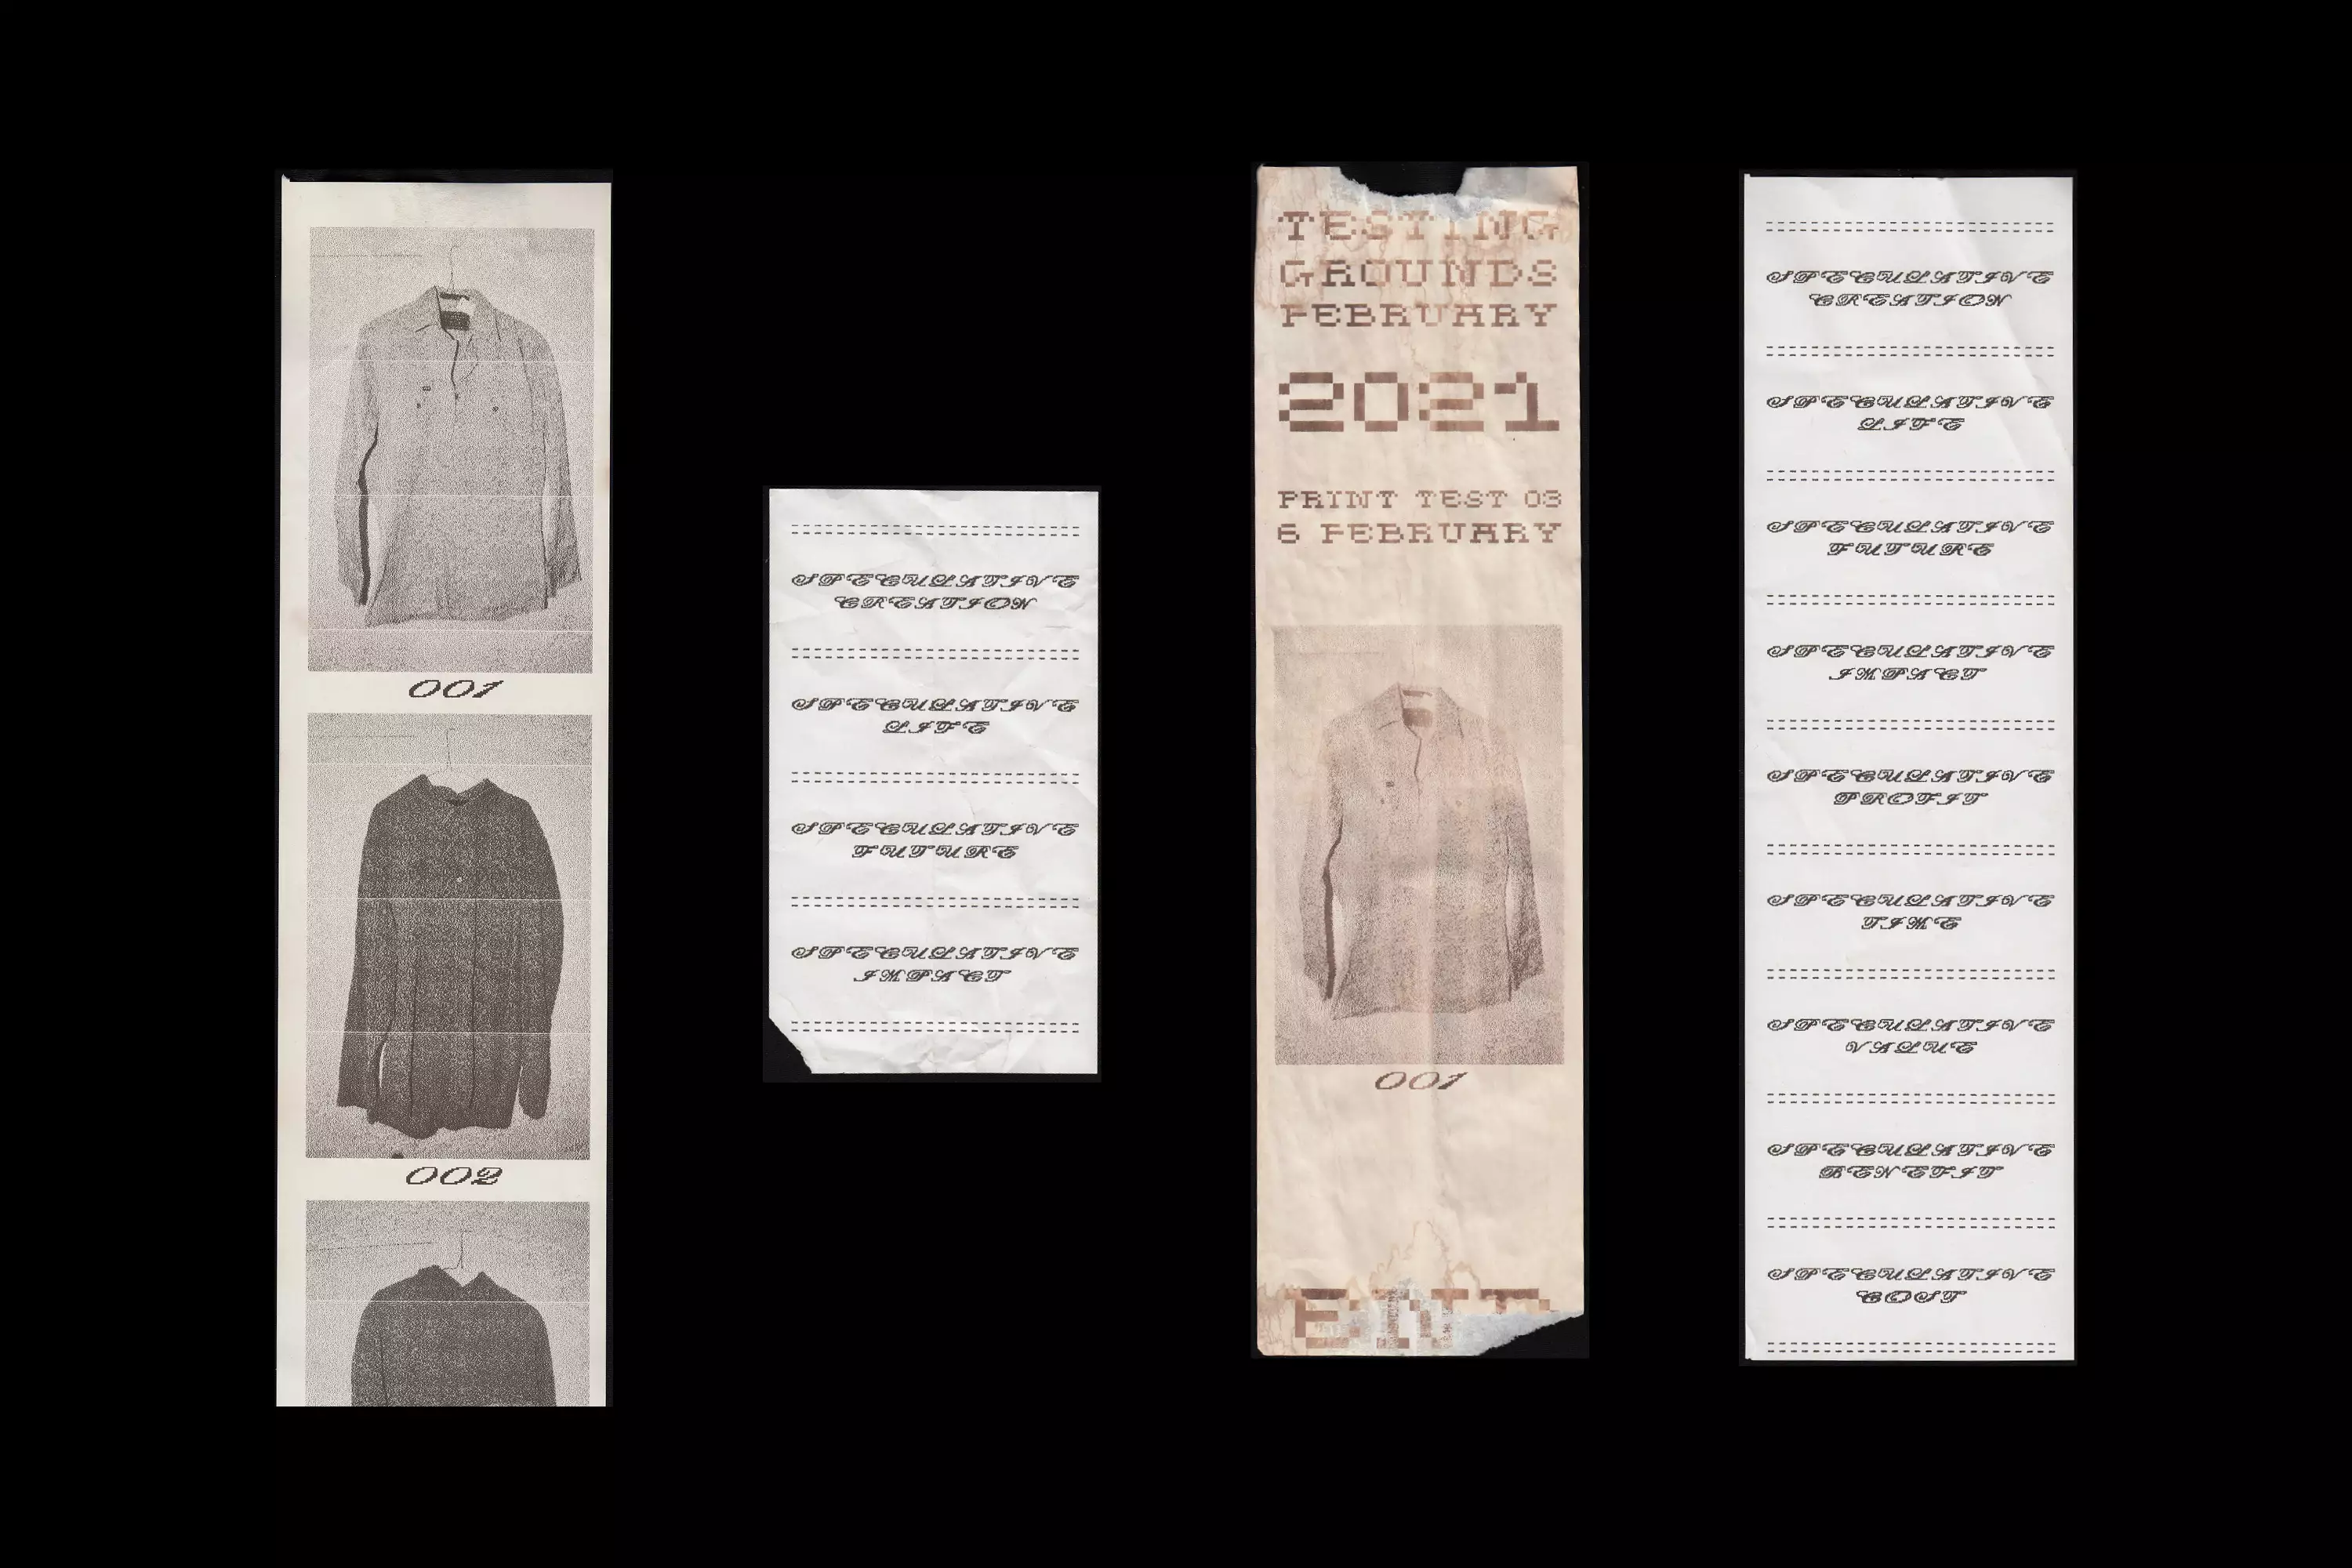 Four receipts against a black background. One is particularly yellow and aged.